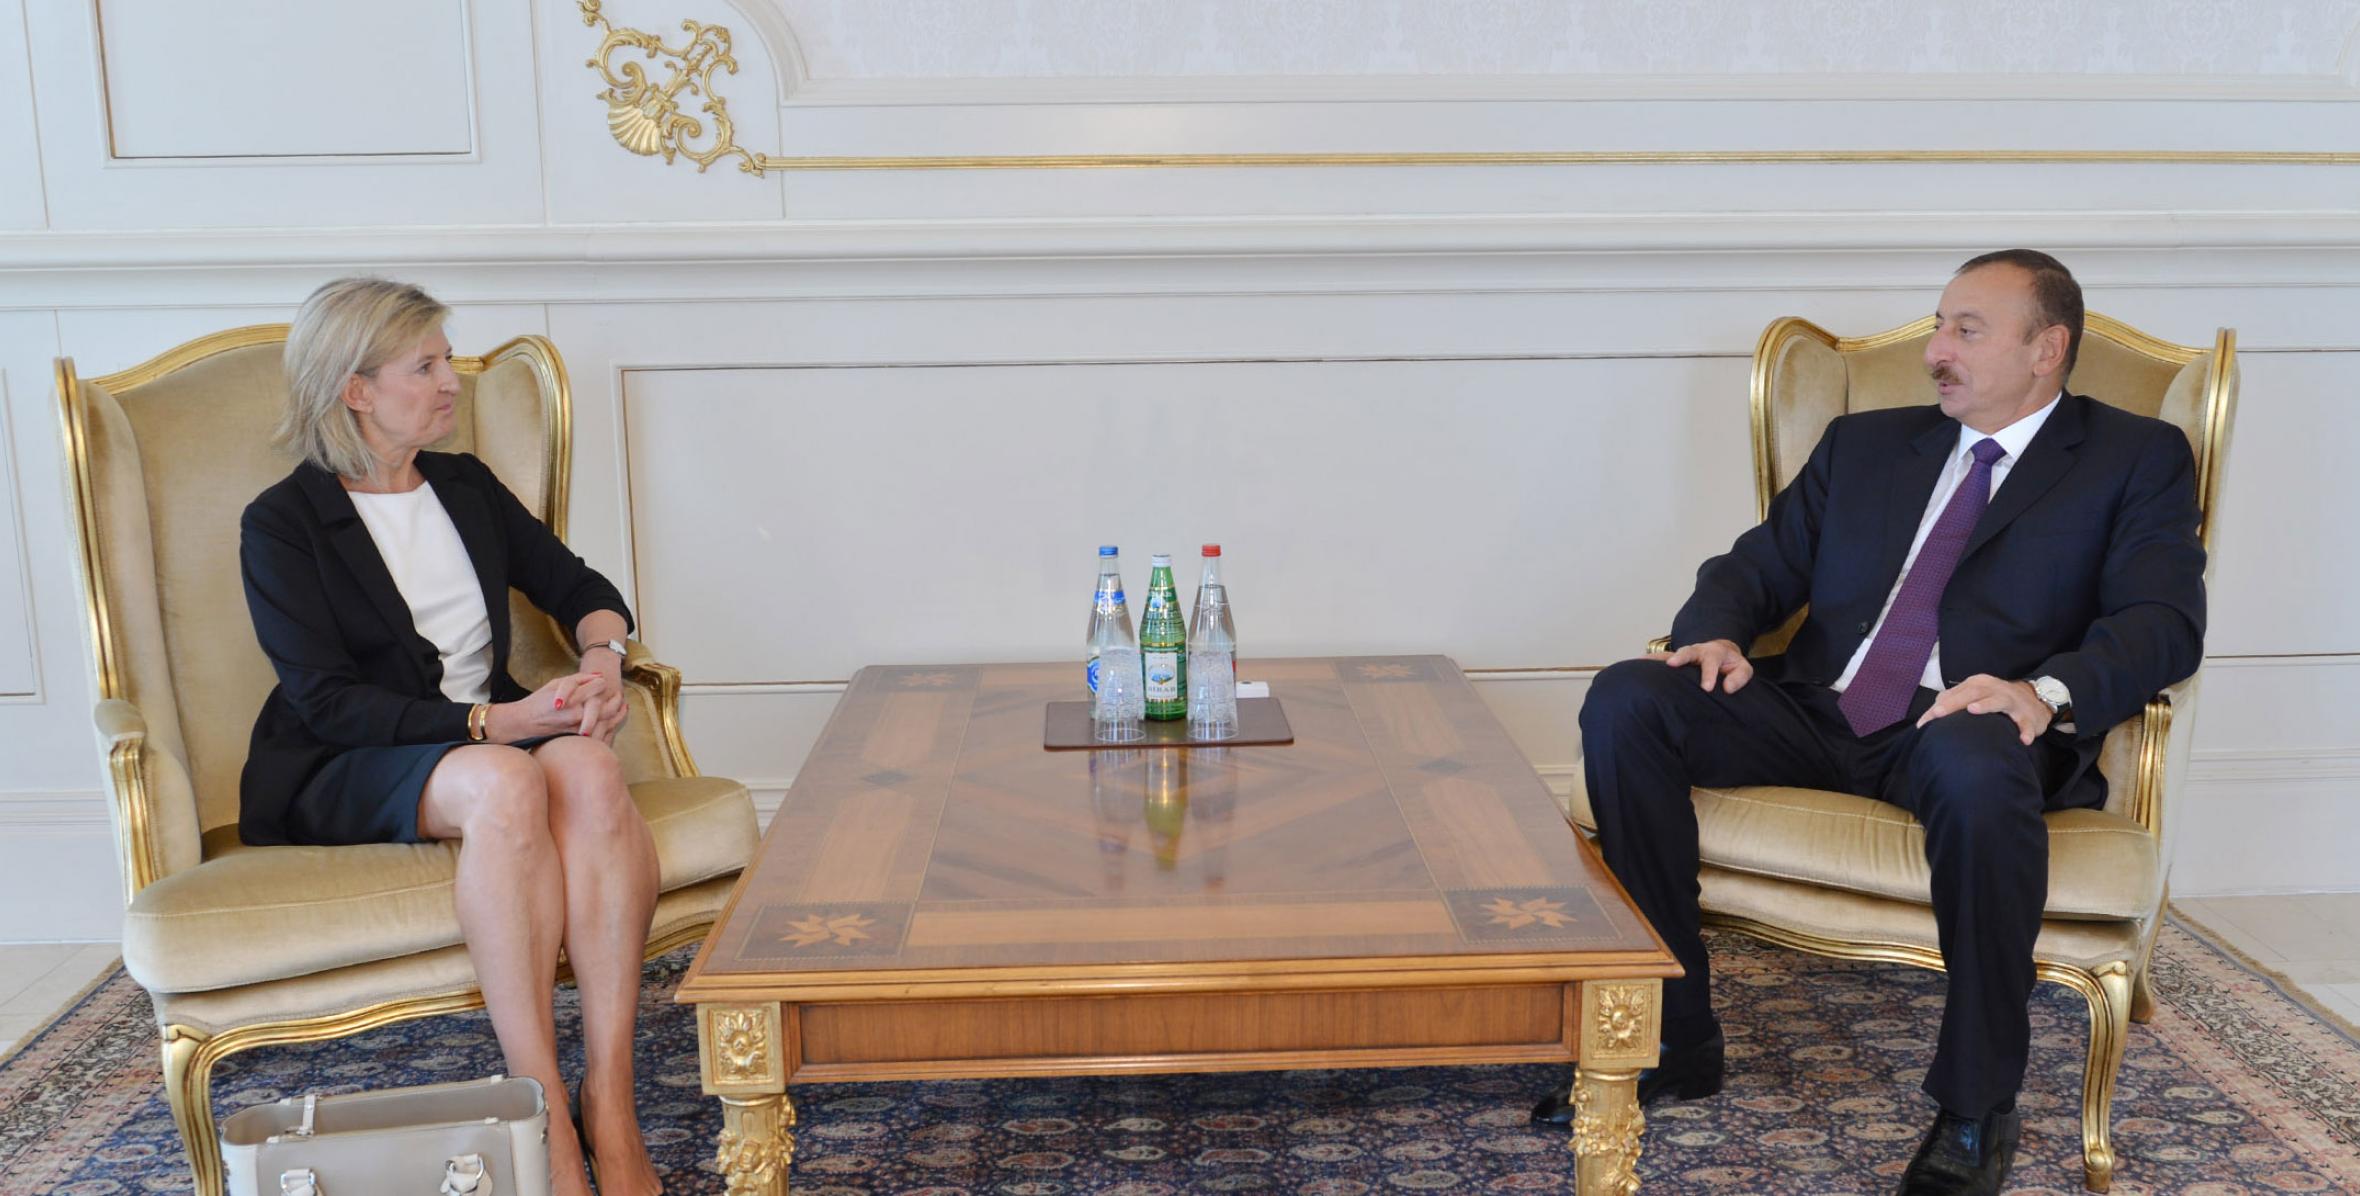 Ilham Aliyev accepted the credentials of the Ambassador of Belgium to Azerbaijan